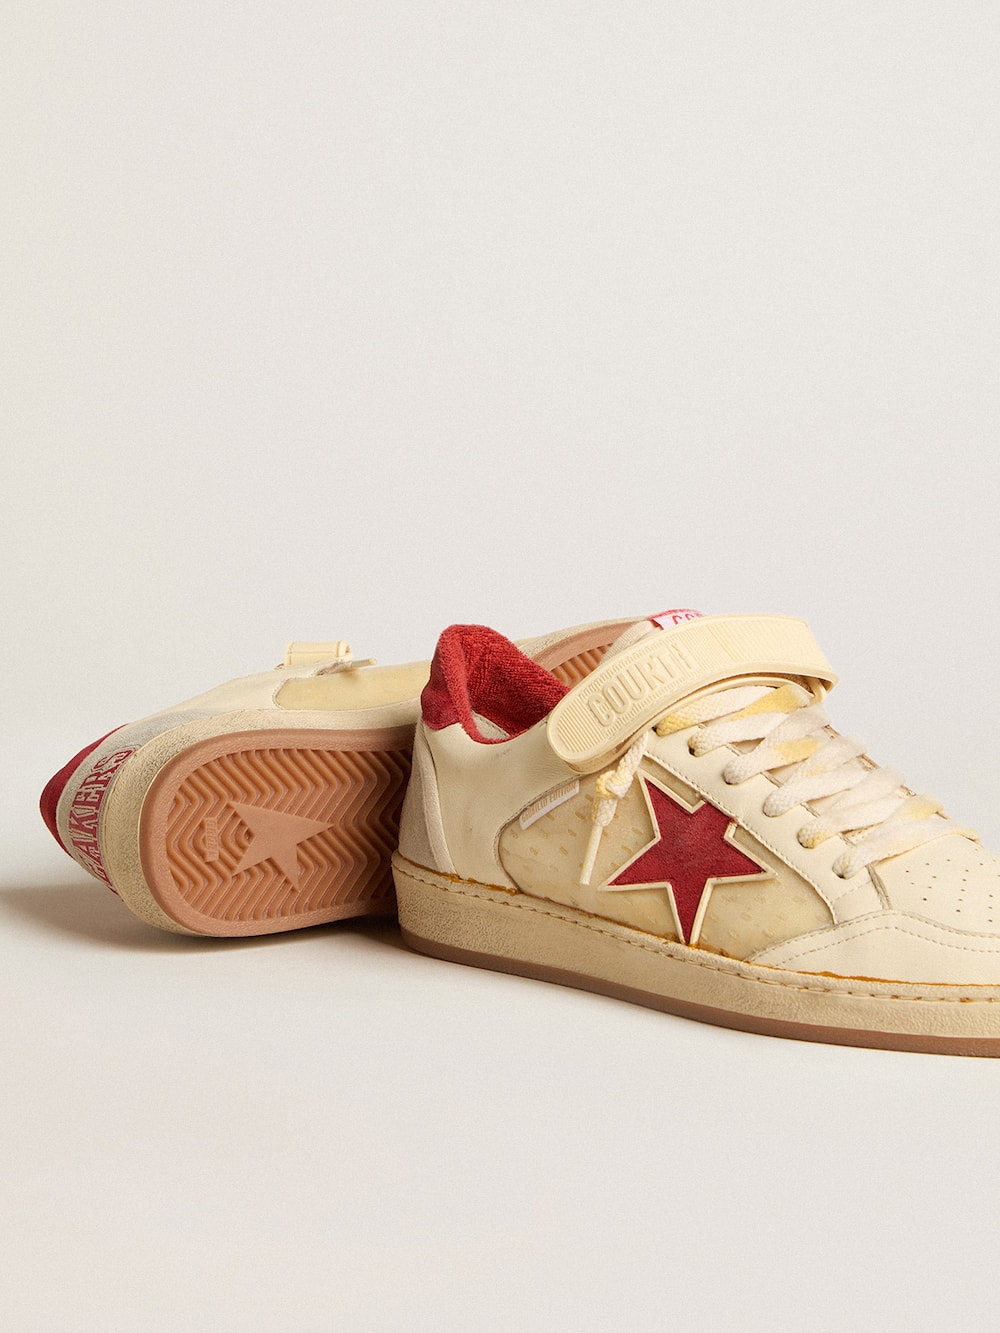 Golden Goose - Men’s Ball Star LAB in nappa and PVC with red suede star and heel tab in 